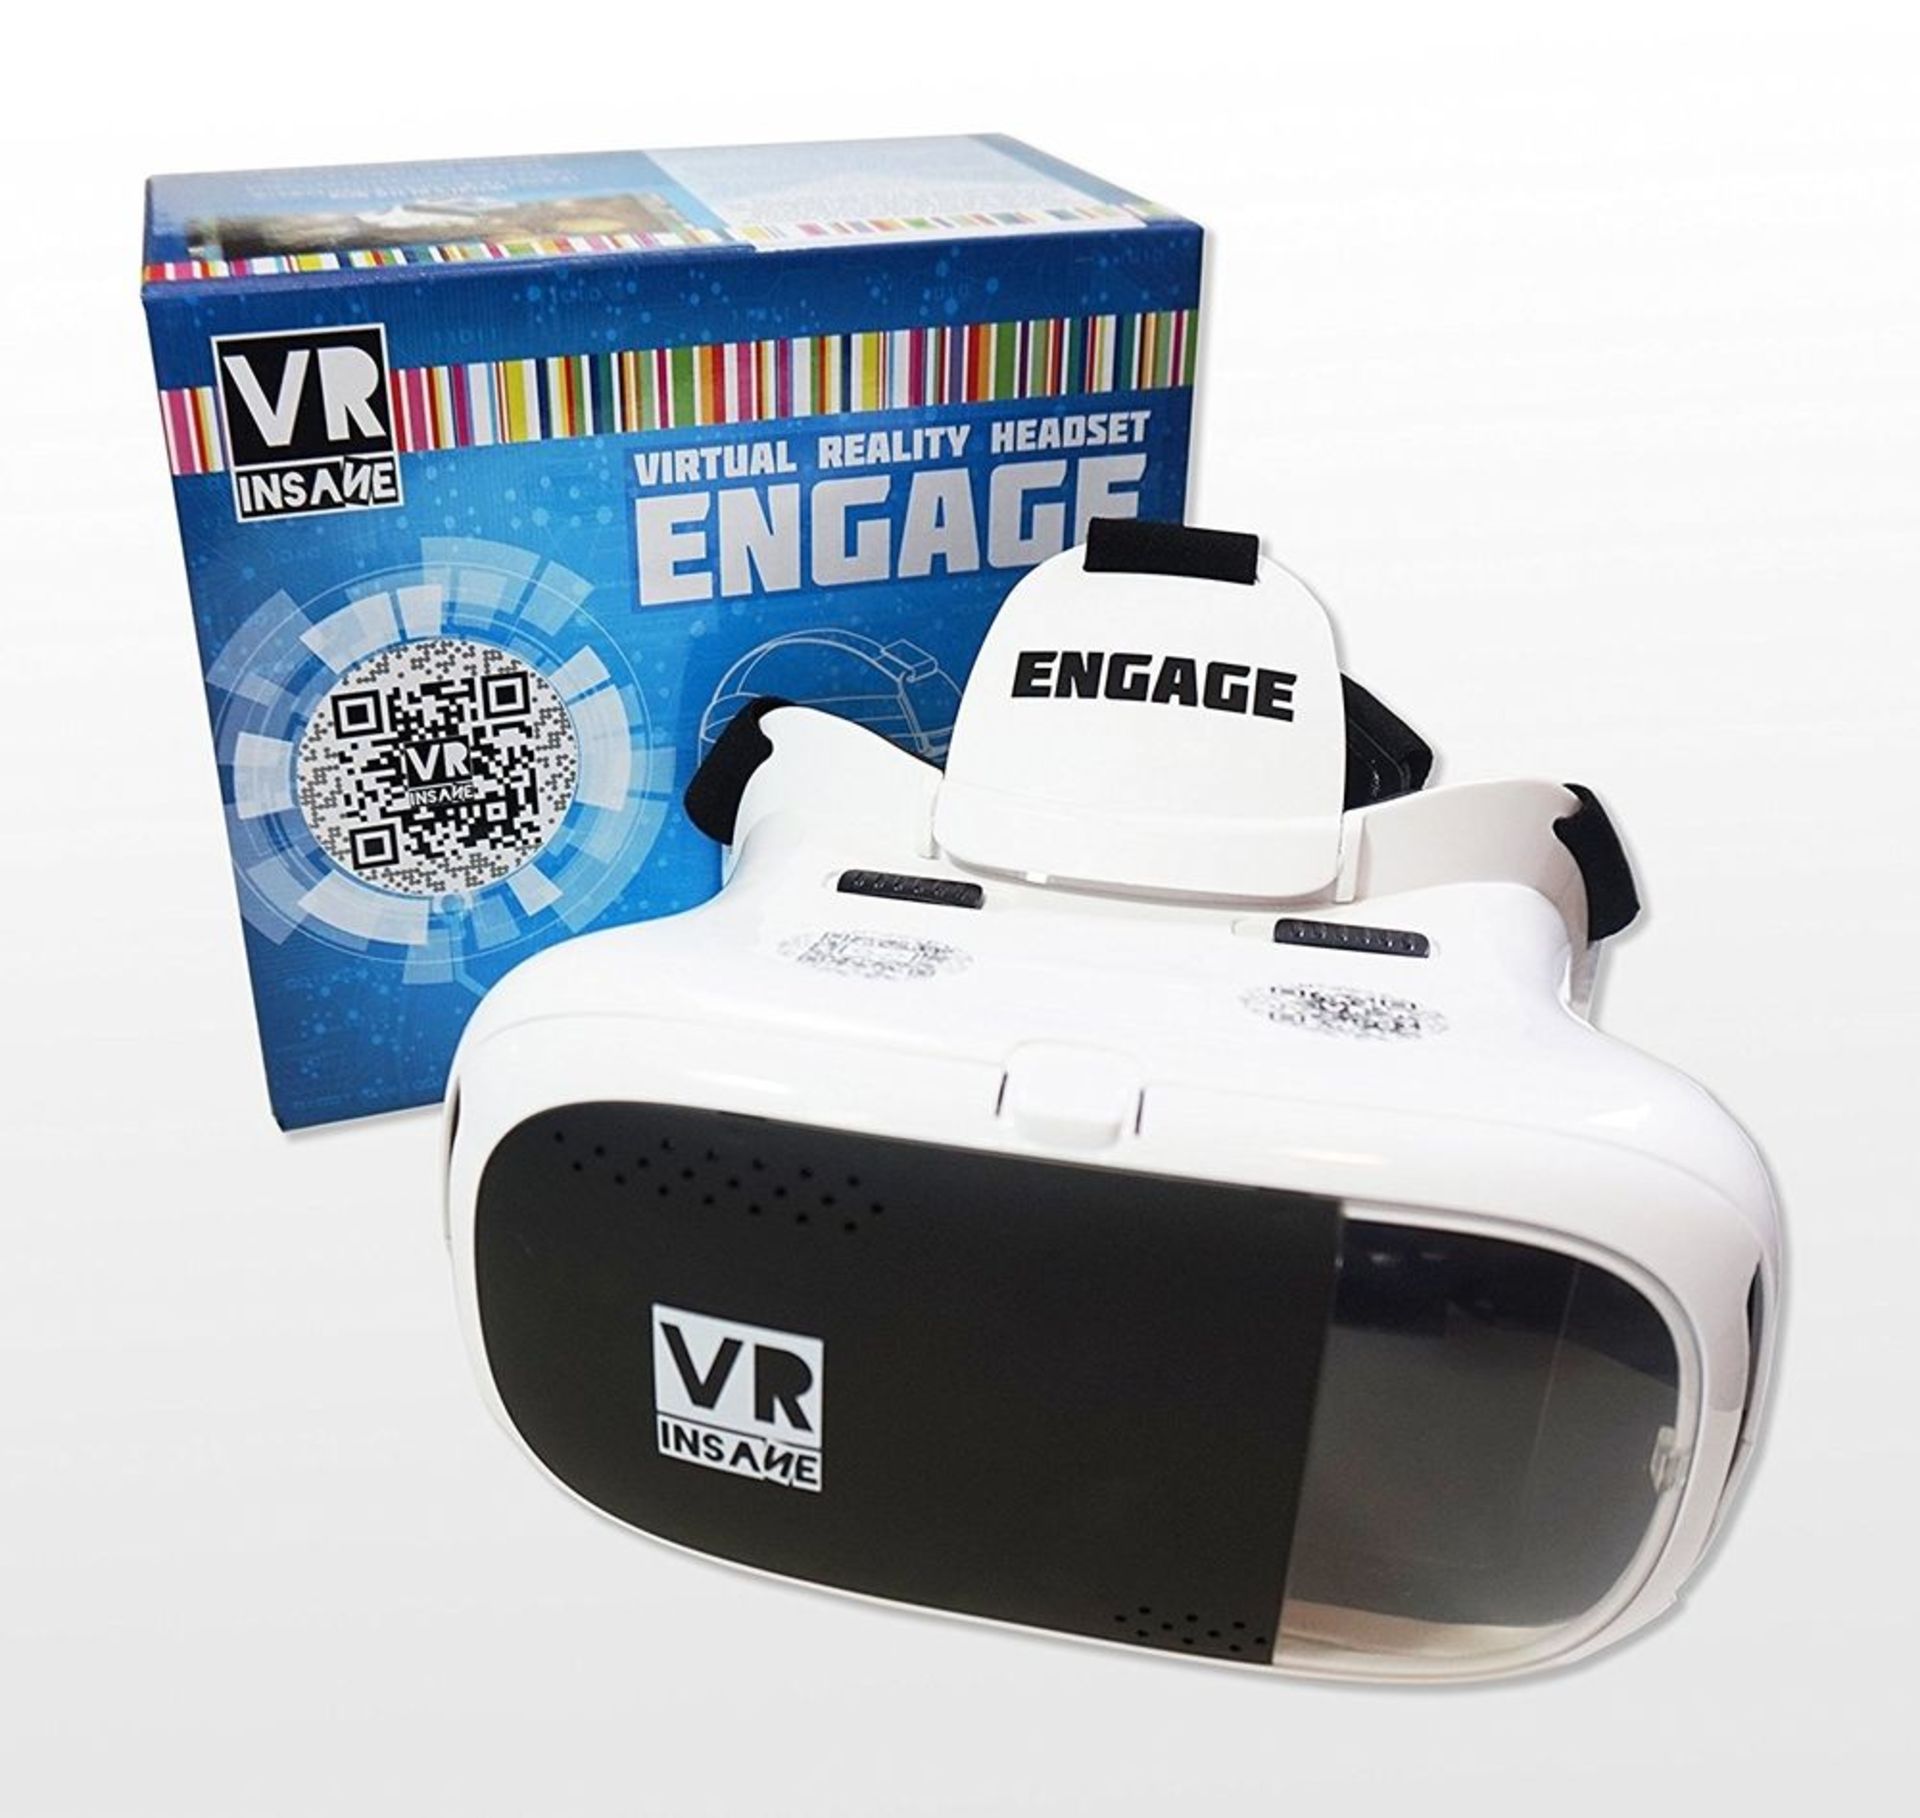 V Brand New Engage Virtual Reality Headset With Adjustable Lenses - Spectacle Friendly - Air